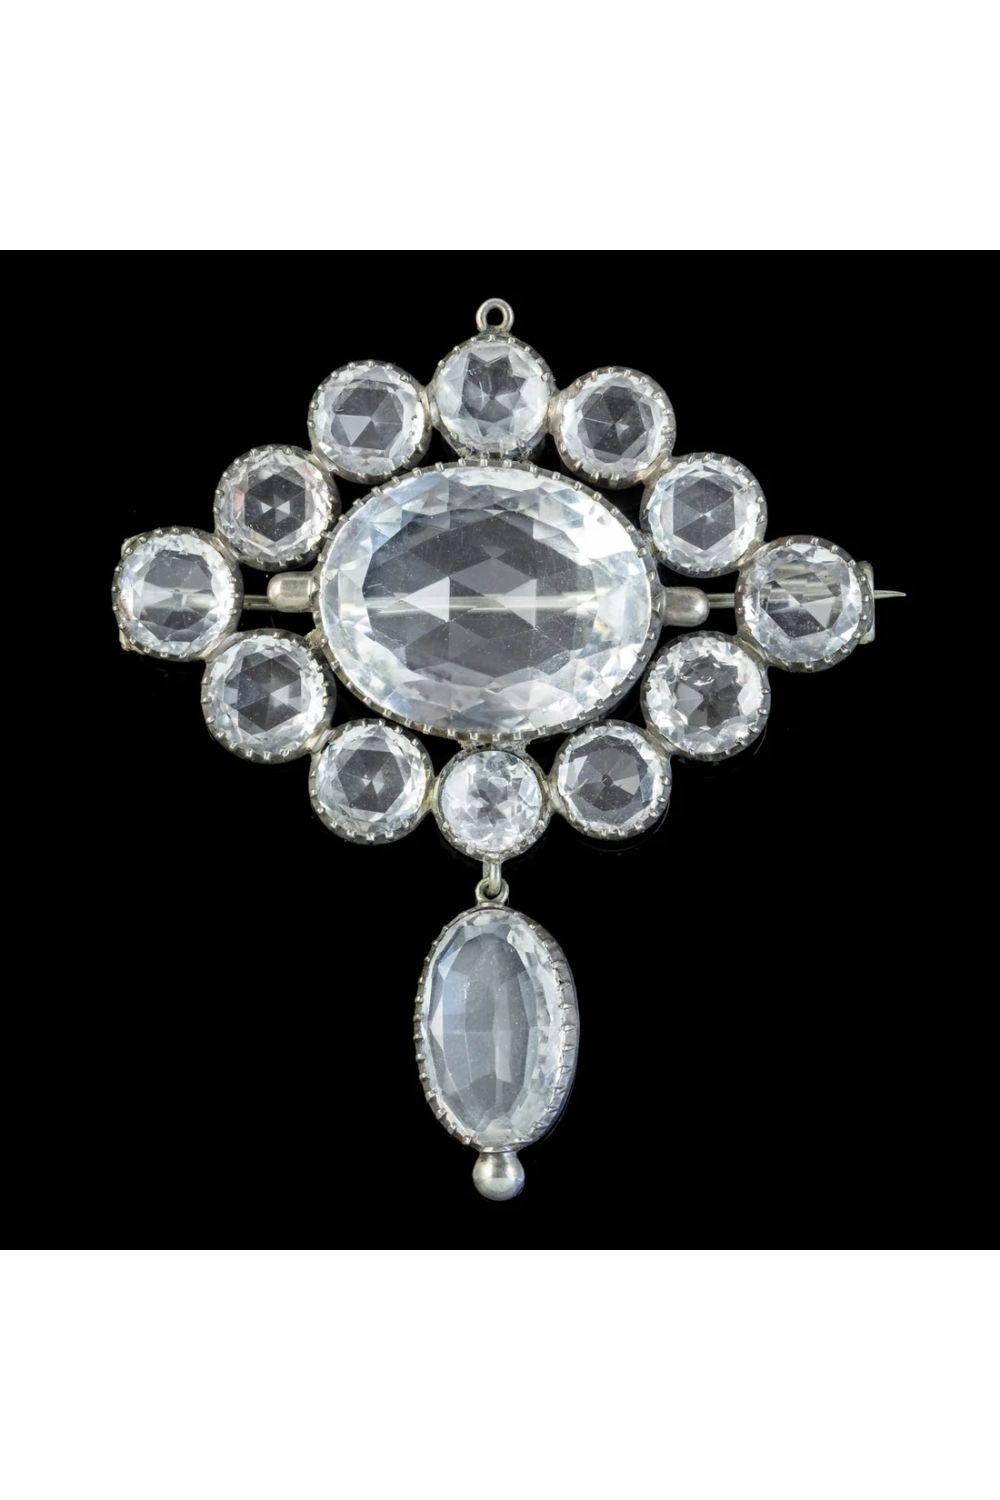 A magnificent Antique Victorian brooch fashioned in Silver and set with large, clear Rock Crystals which have been cut with many triangular facets which glisten beautifully when they catch the light. 

The beautiful clear Rock crystal is a